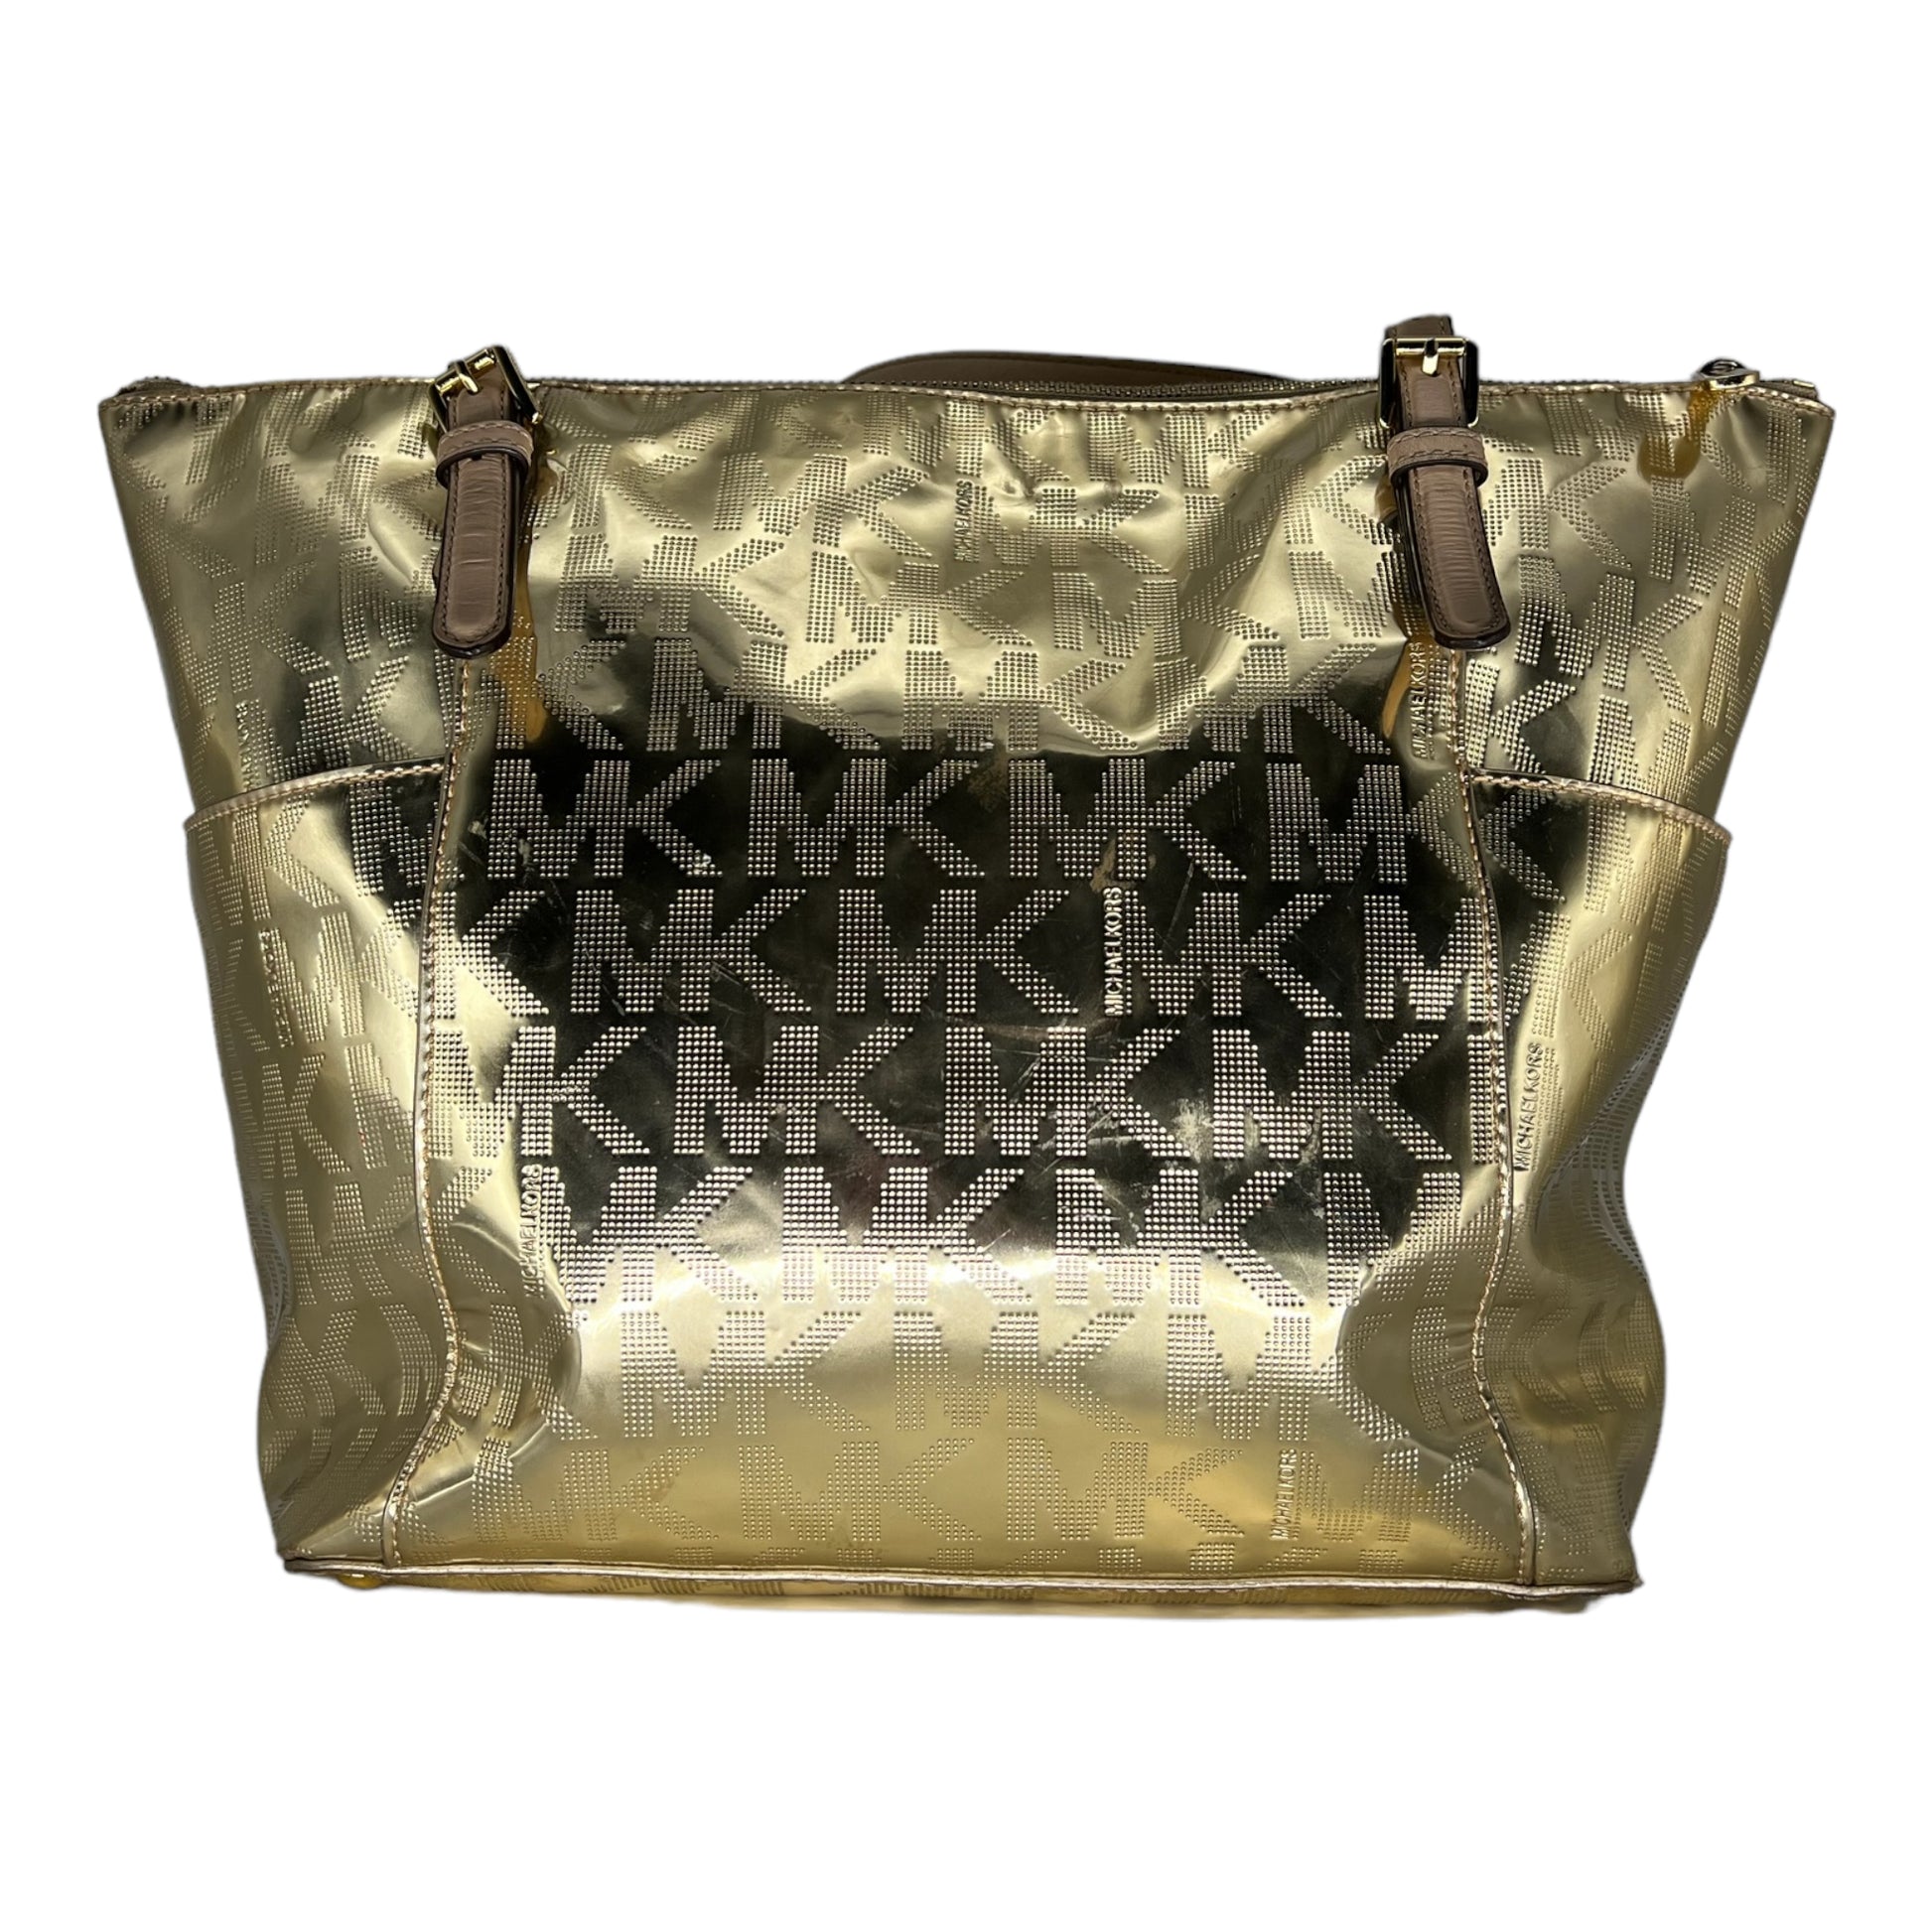 Michael Kors Metallic Gold Leather Jet Set Tote For Sale at